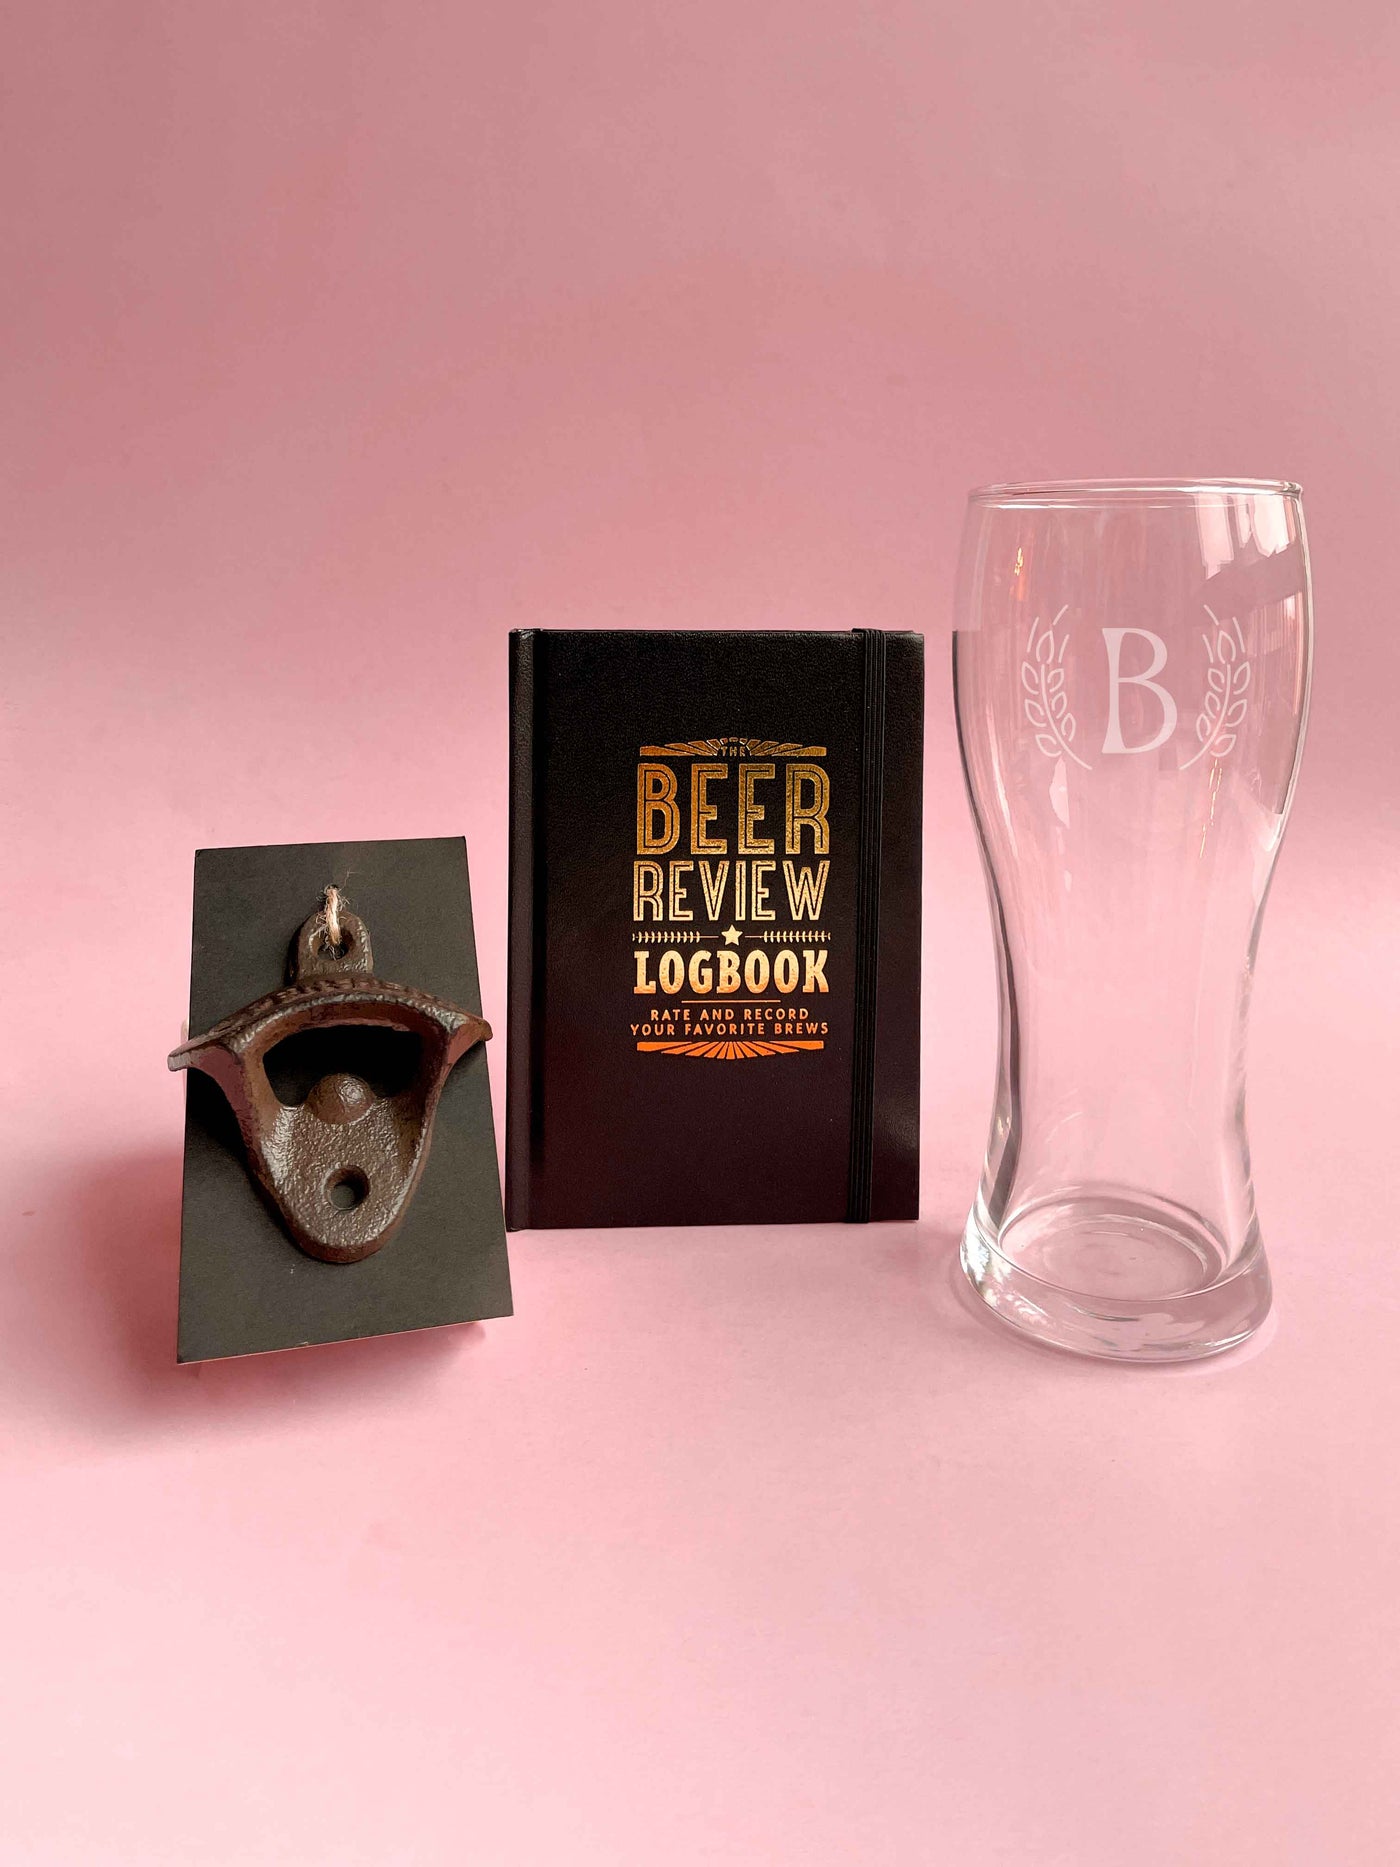 The Professional Beer Taster Gift Box x2 - Personalize it!